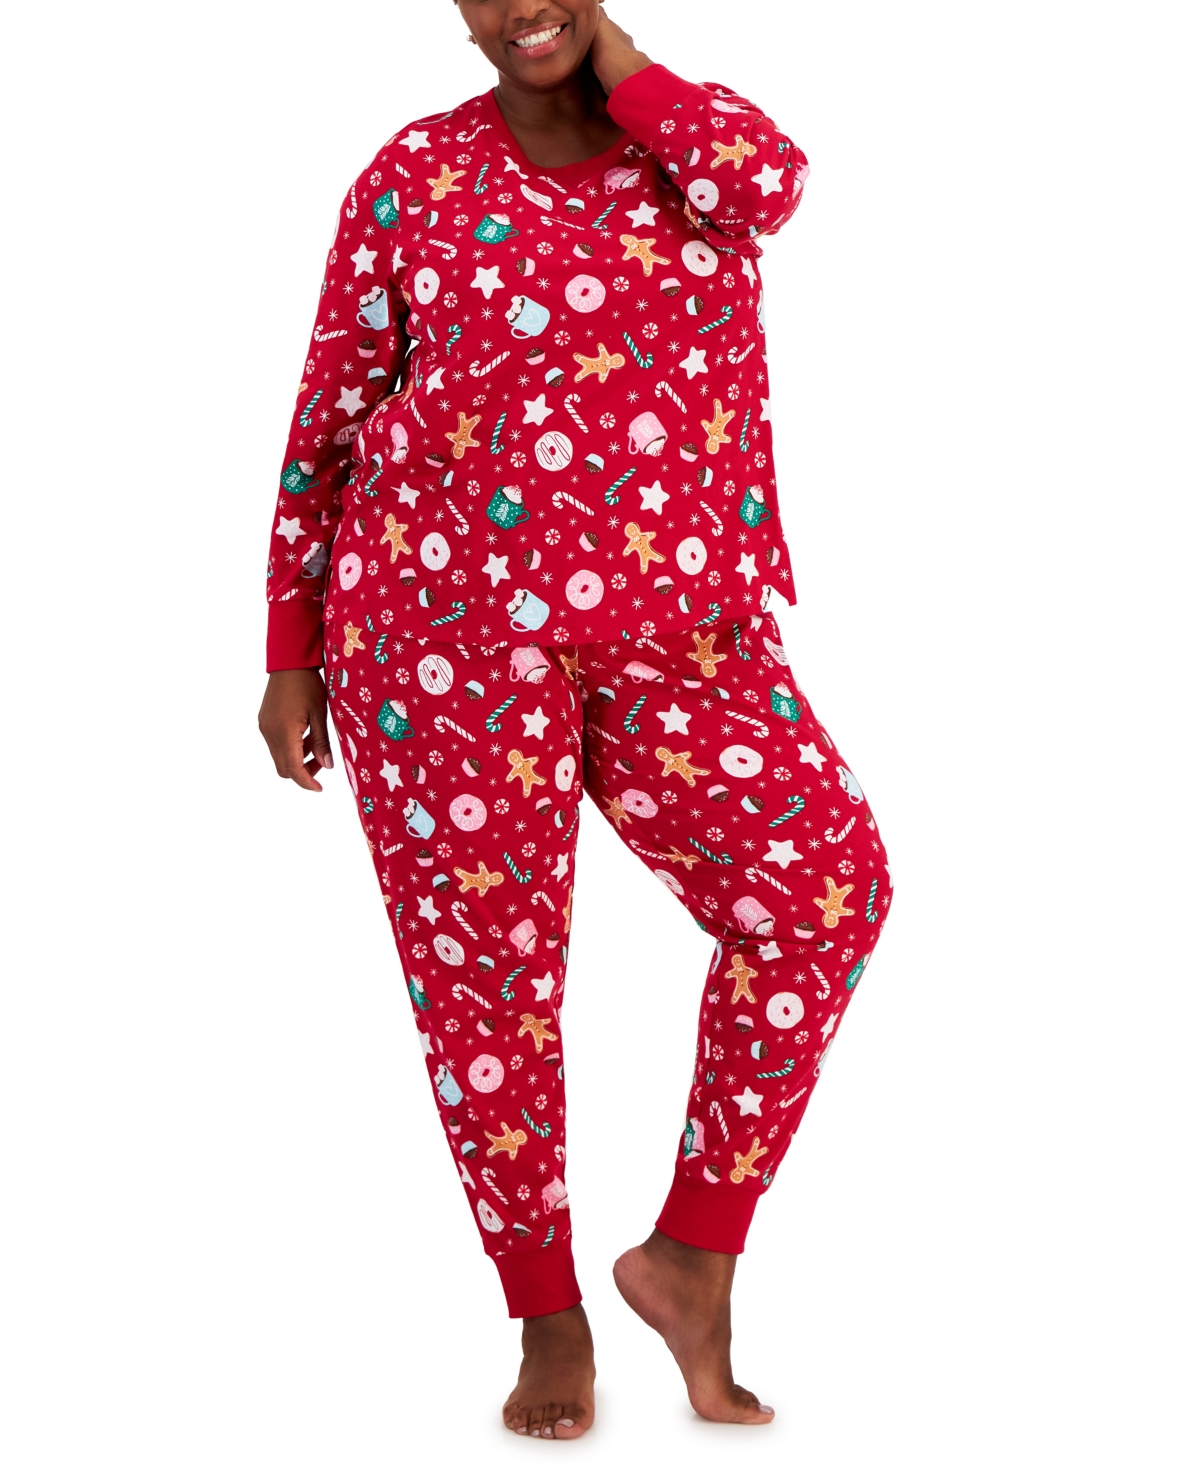 Matching Family Pajamas Plus Size Sweets Printed Pajamas Set, Created for Macy's - Sweets